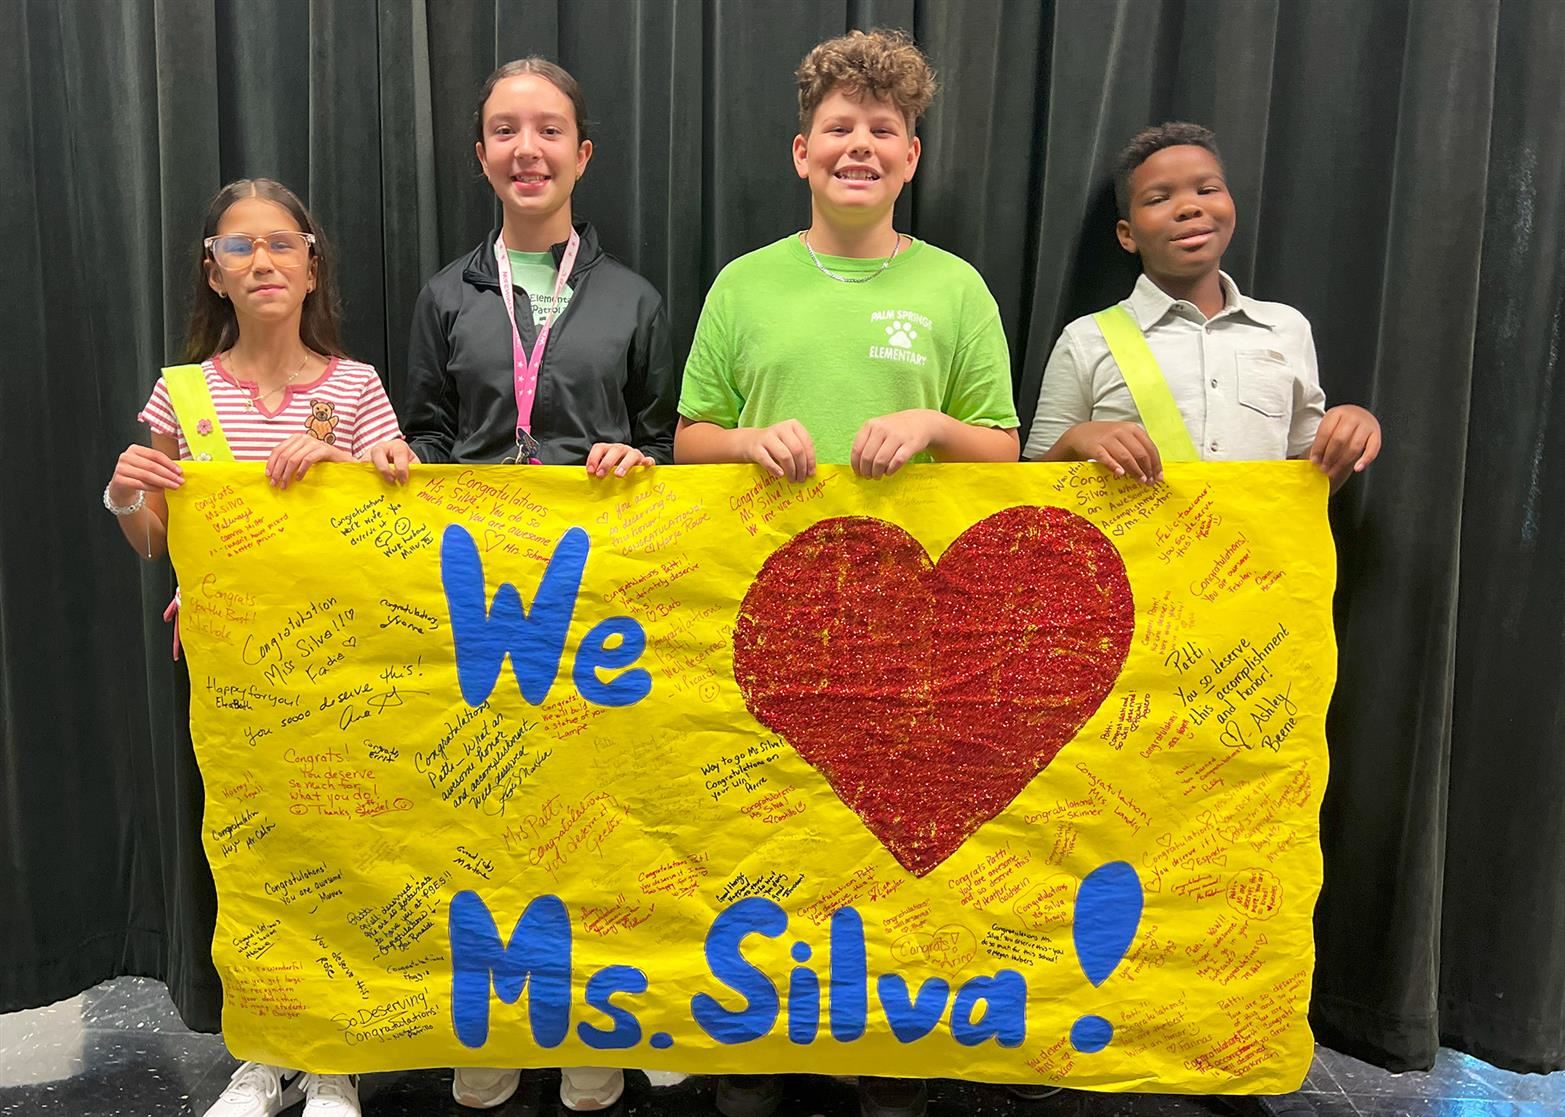  Students waiting to congratulate Ms. Silva with a sign that they made for the event